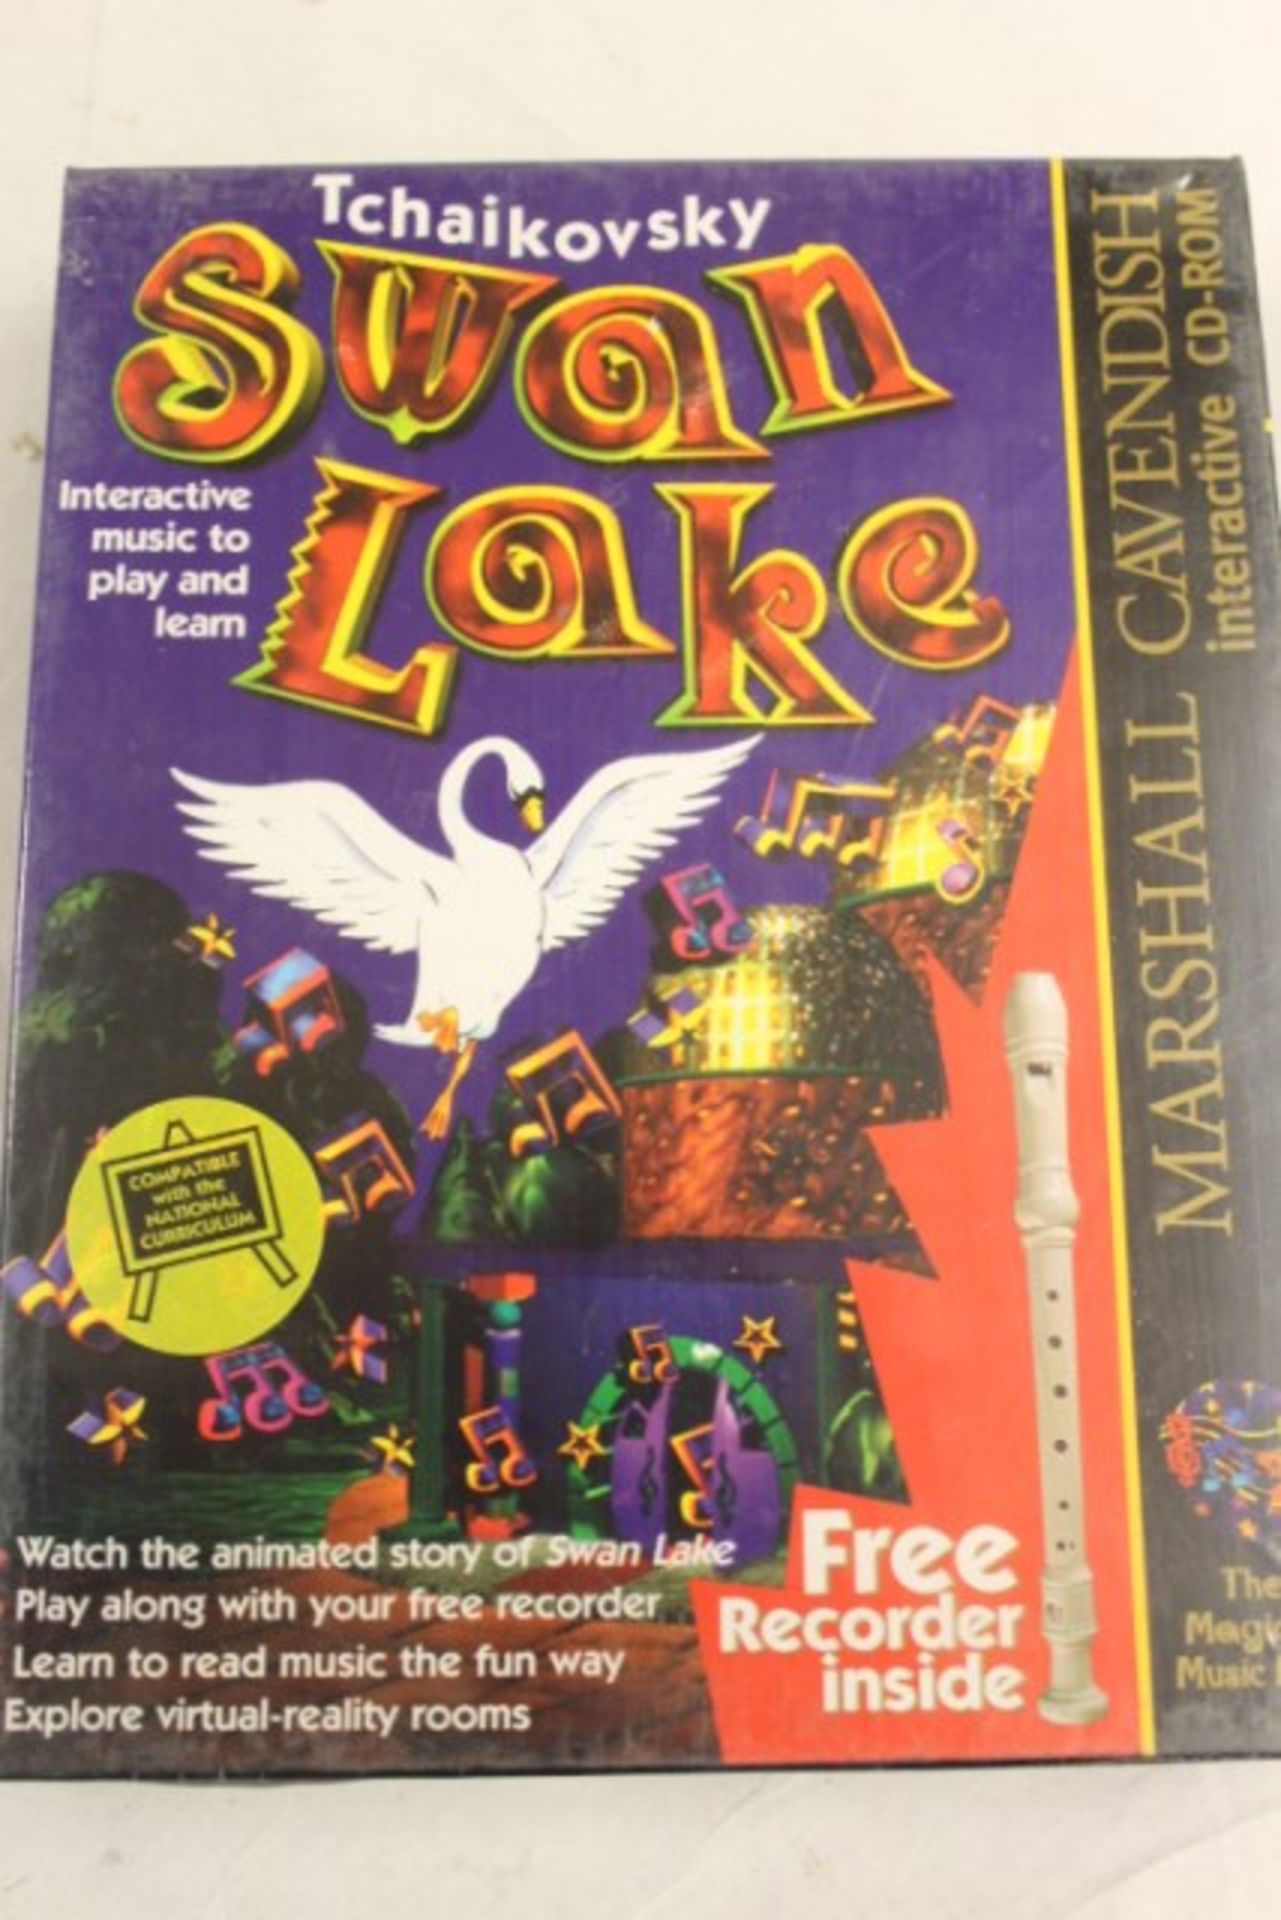 V *TRADE QTY* Grade A Tchaikovsky Swan Lake Interactive Music Game X 4 YOUR BID PRICE TO BE